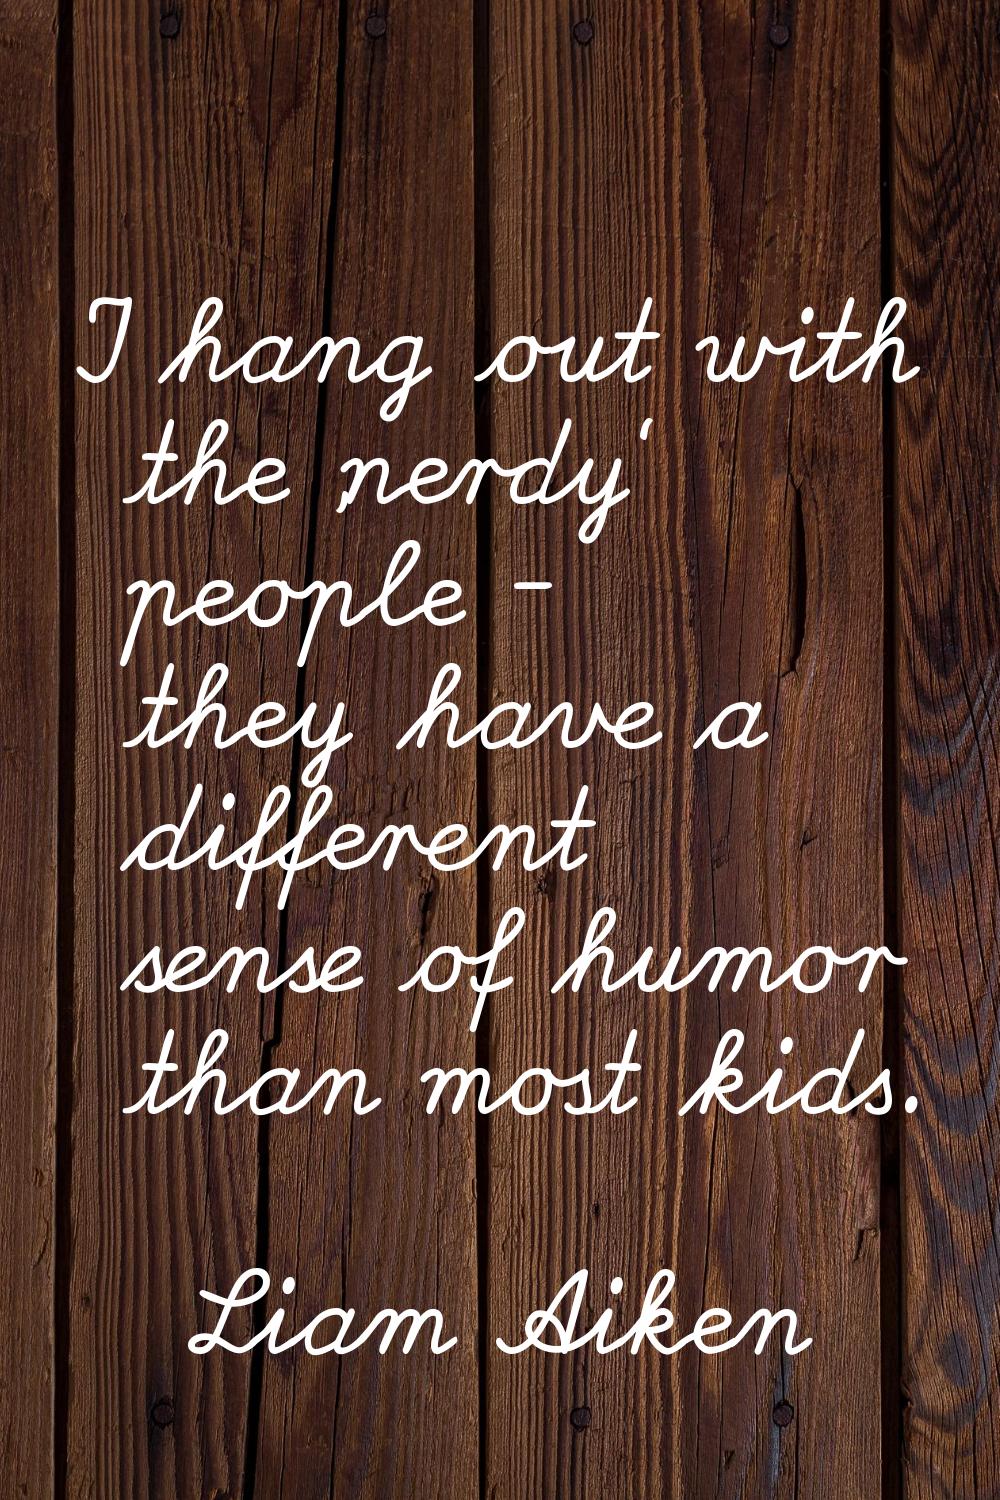 I hang out with the 'nerdy' people - they have a different sense of humor than most kids.